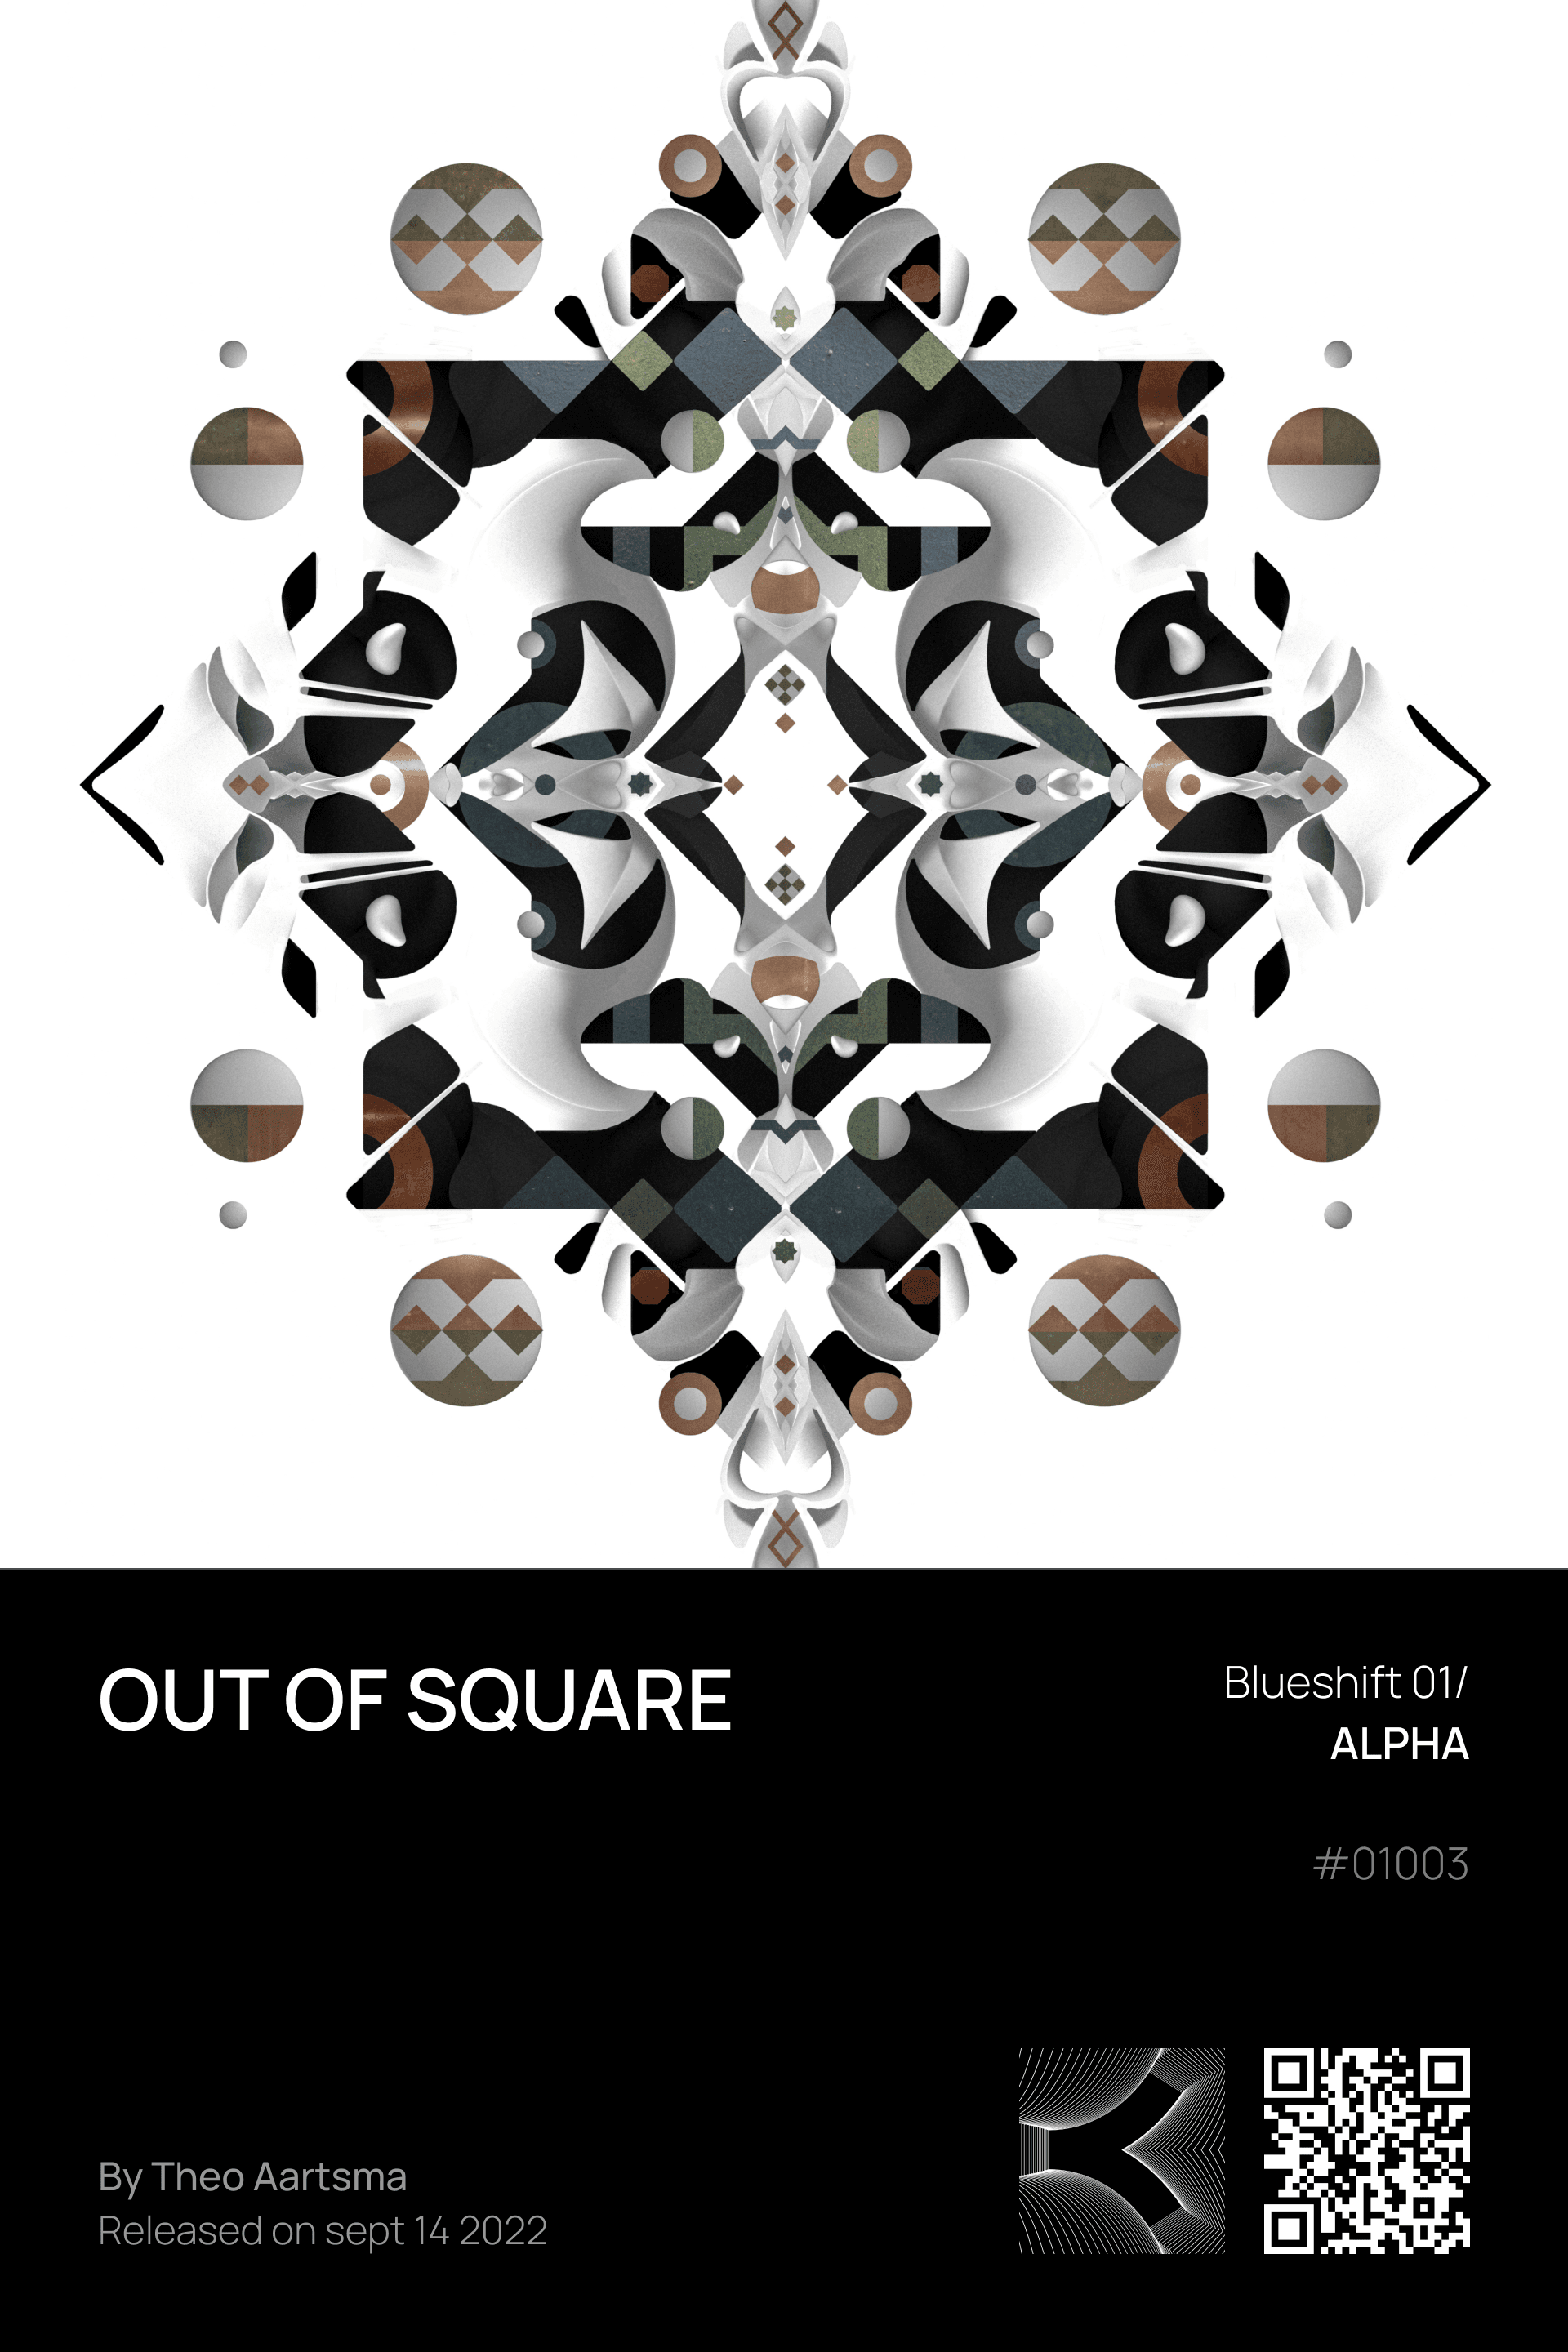 Out of square